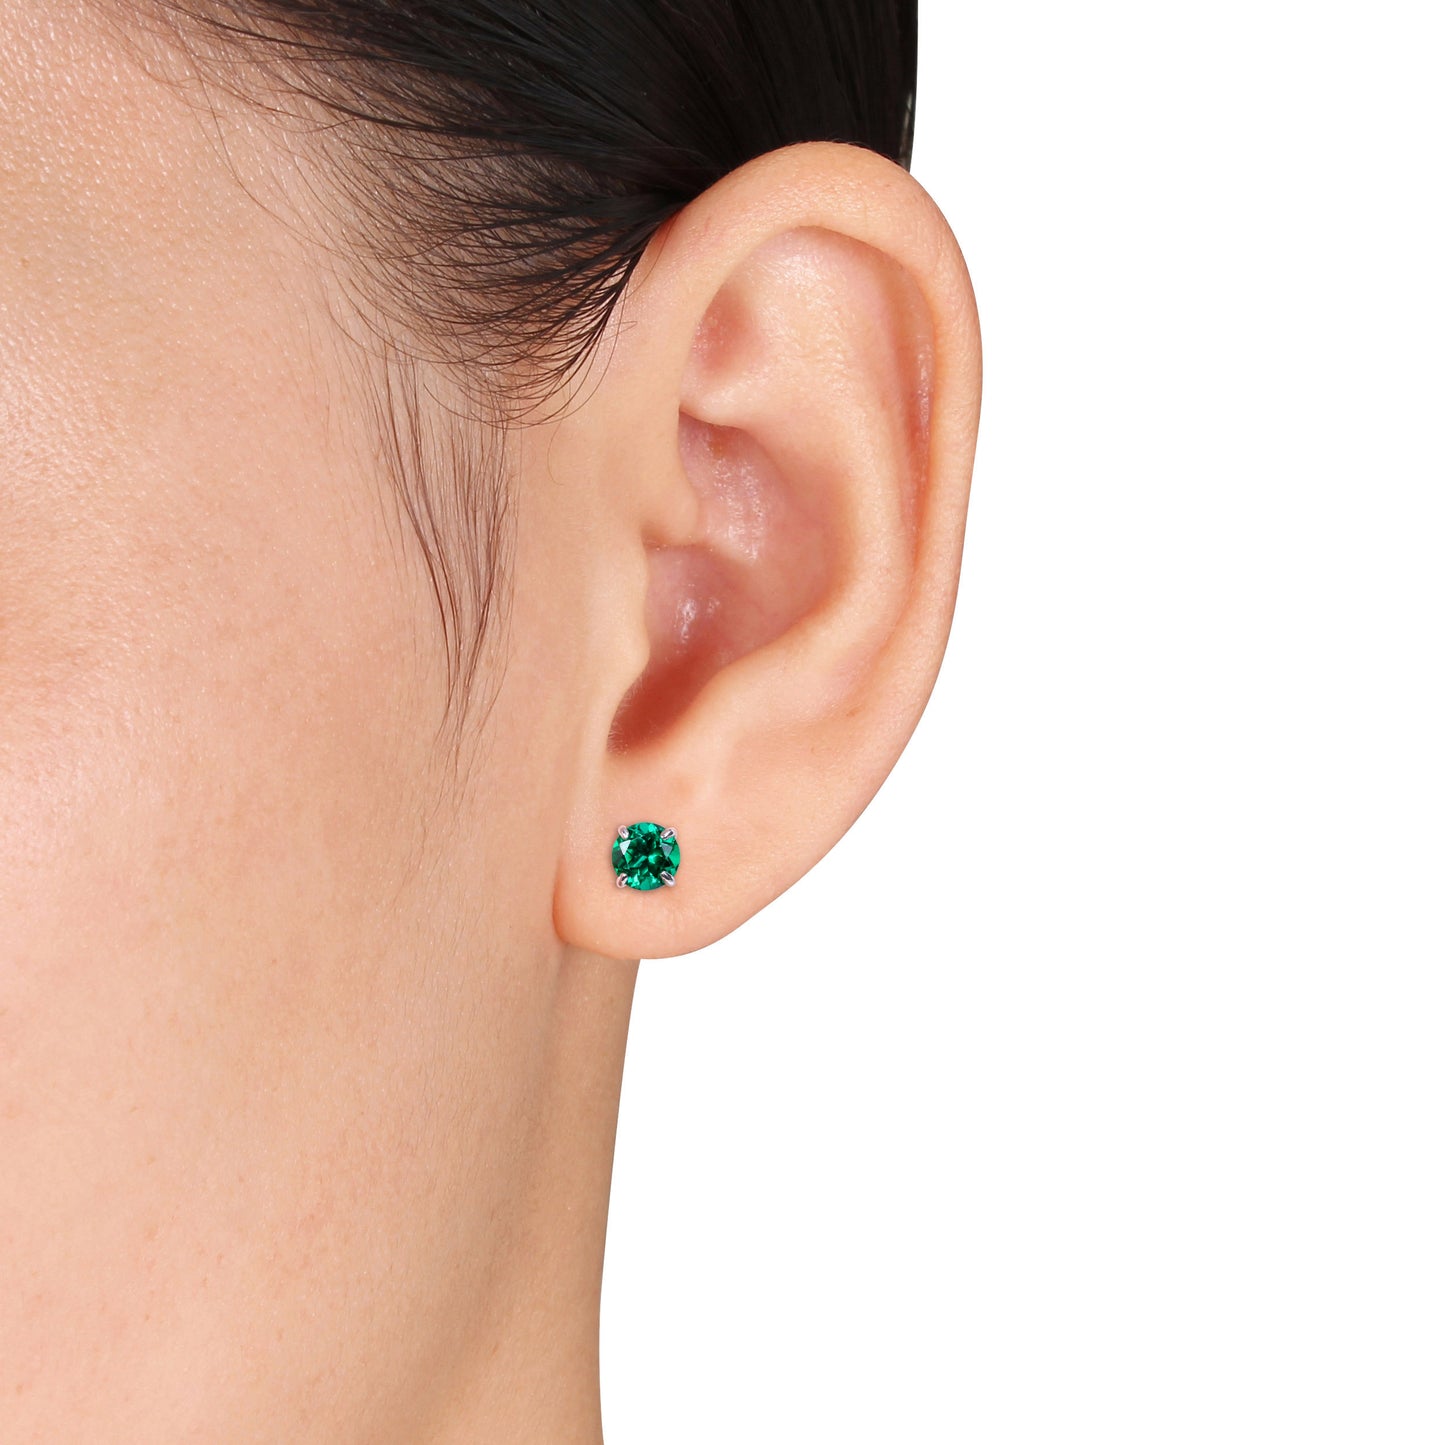 Round Cut Created Emerald Stud Earrings in 10k White Gold